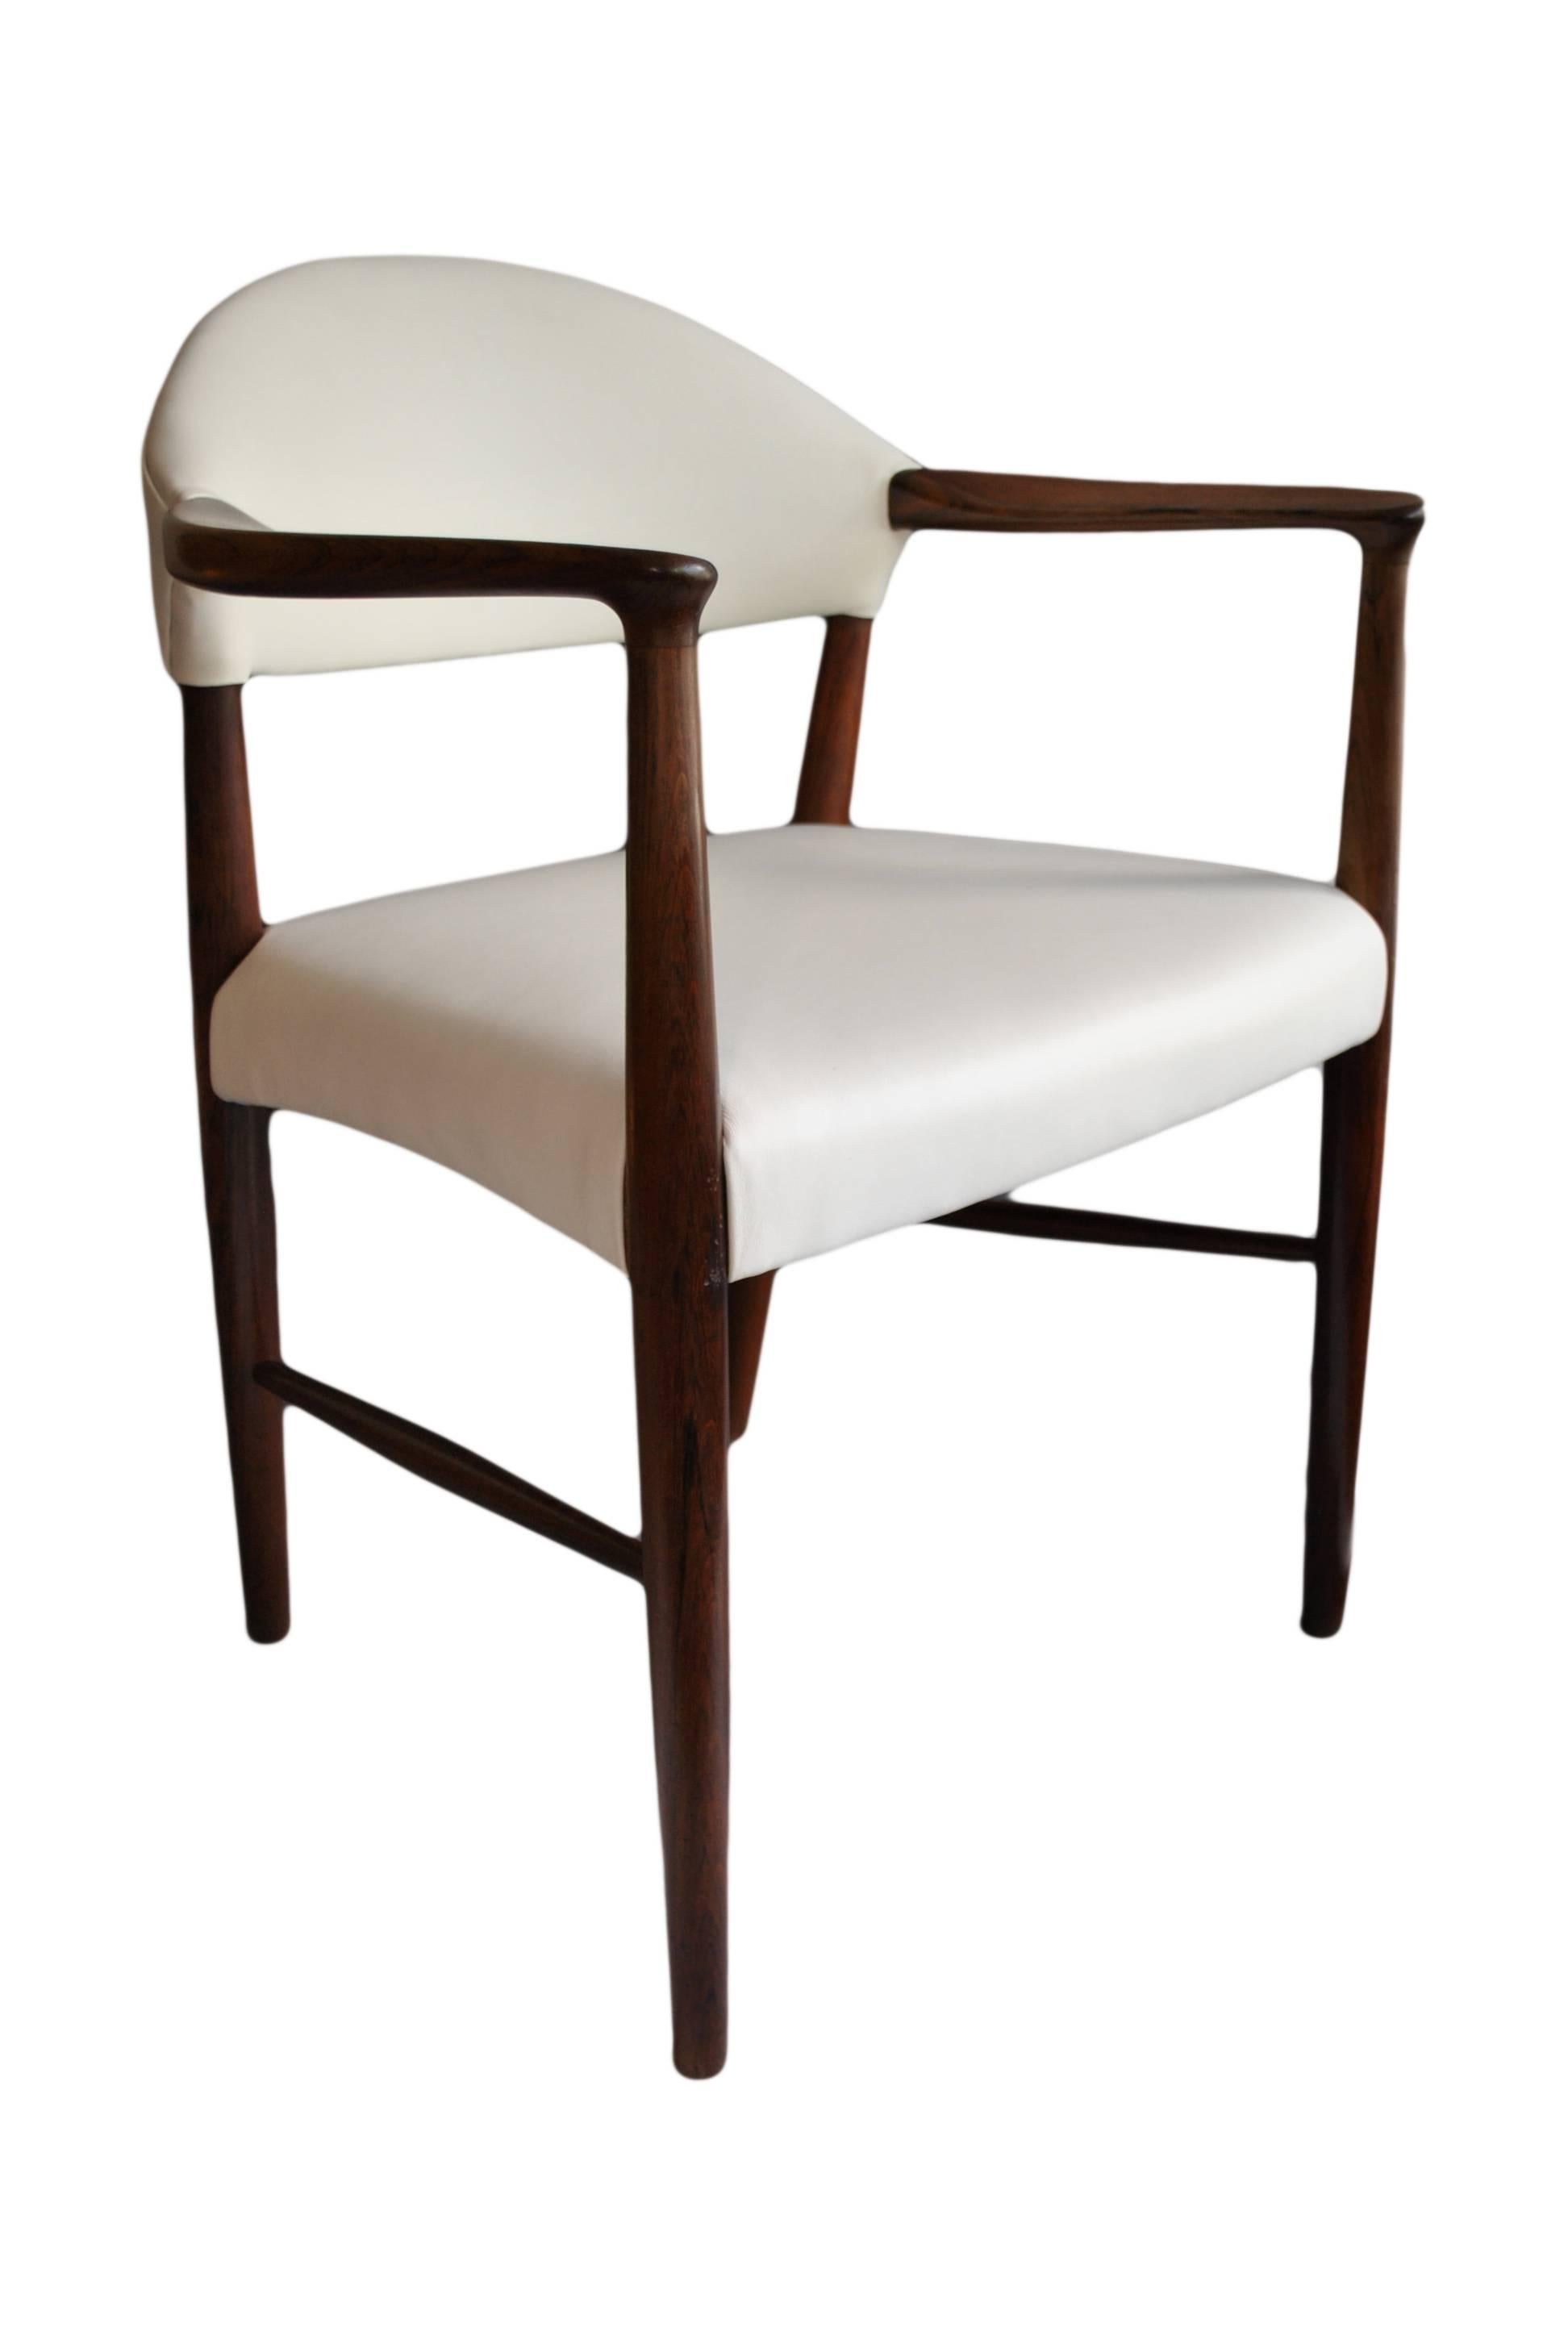 Sculptural chair by Kurt Olsen and manufactured by SM Mobler, Denmark, circa 1960.
Newly reupholstered in white leather. Re-polished frame.